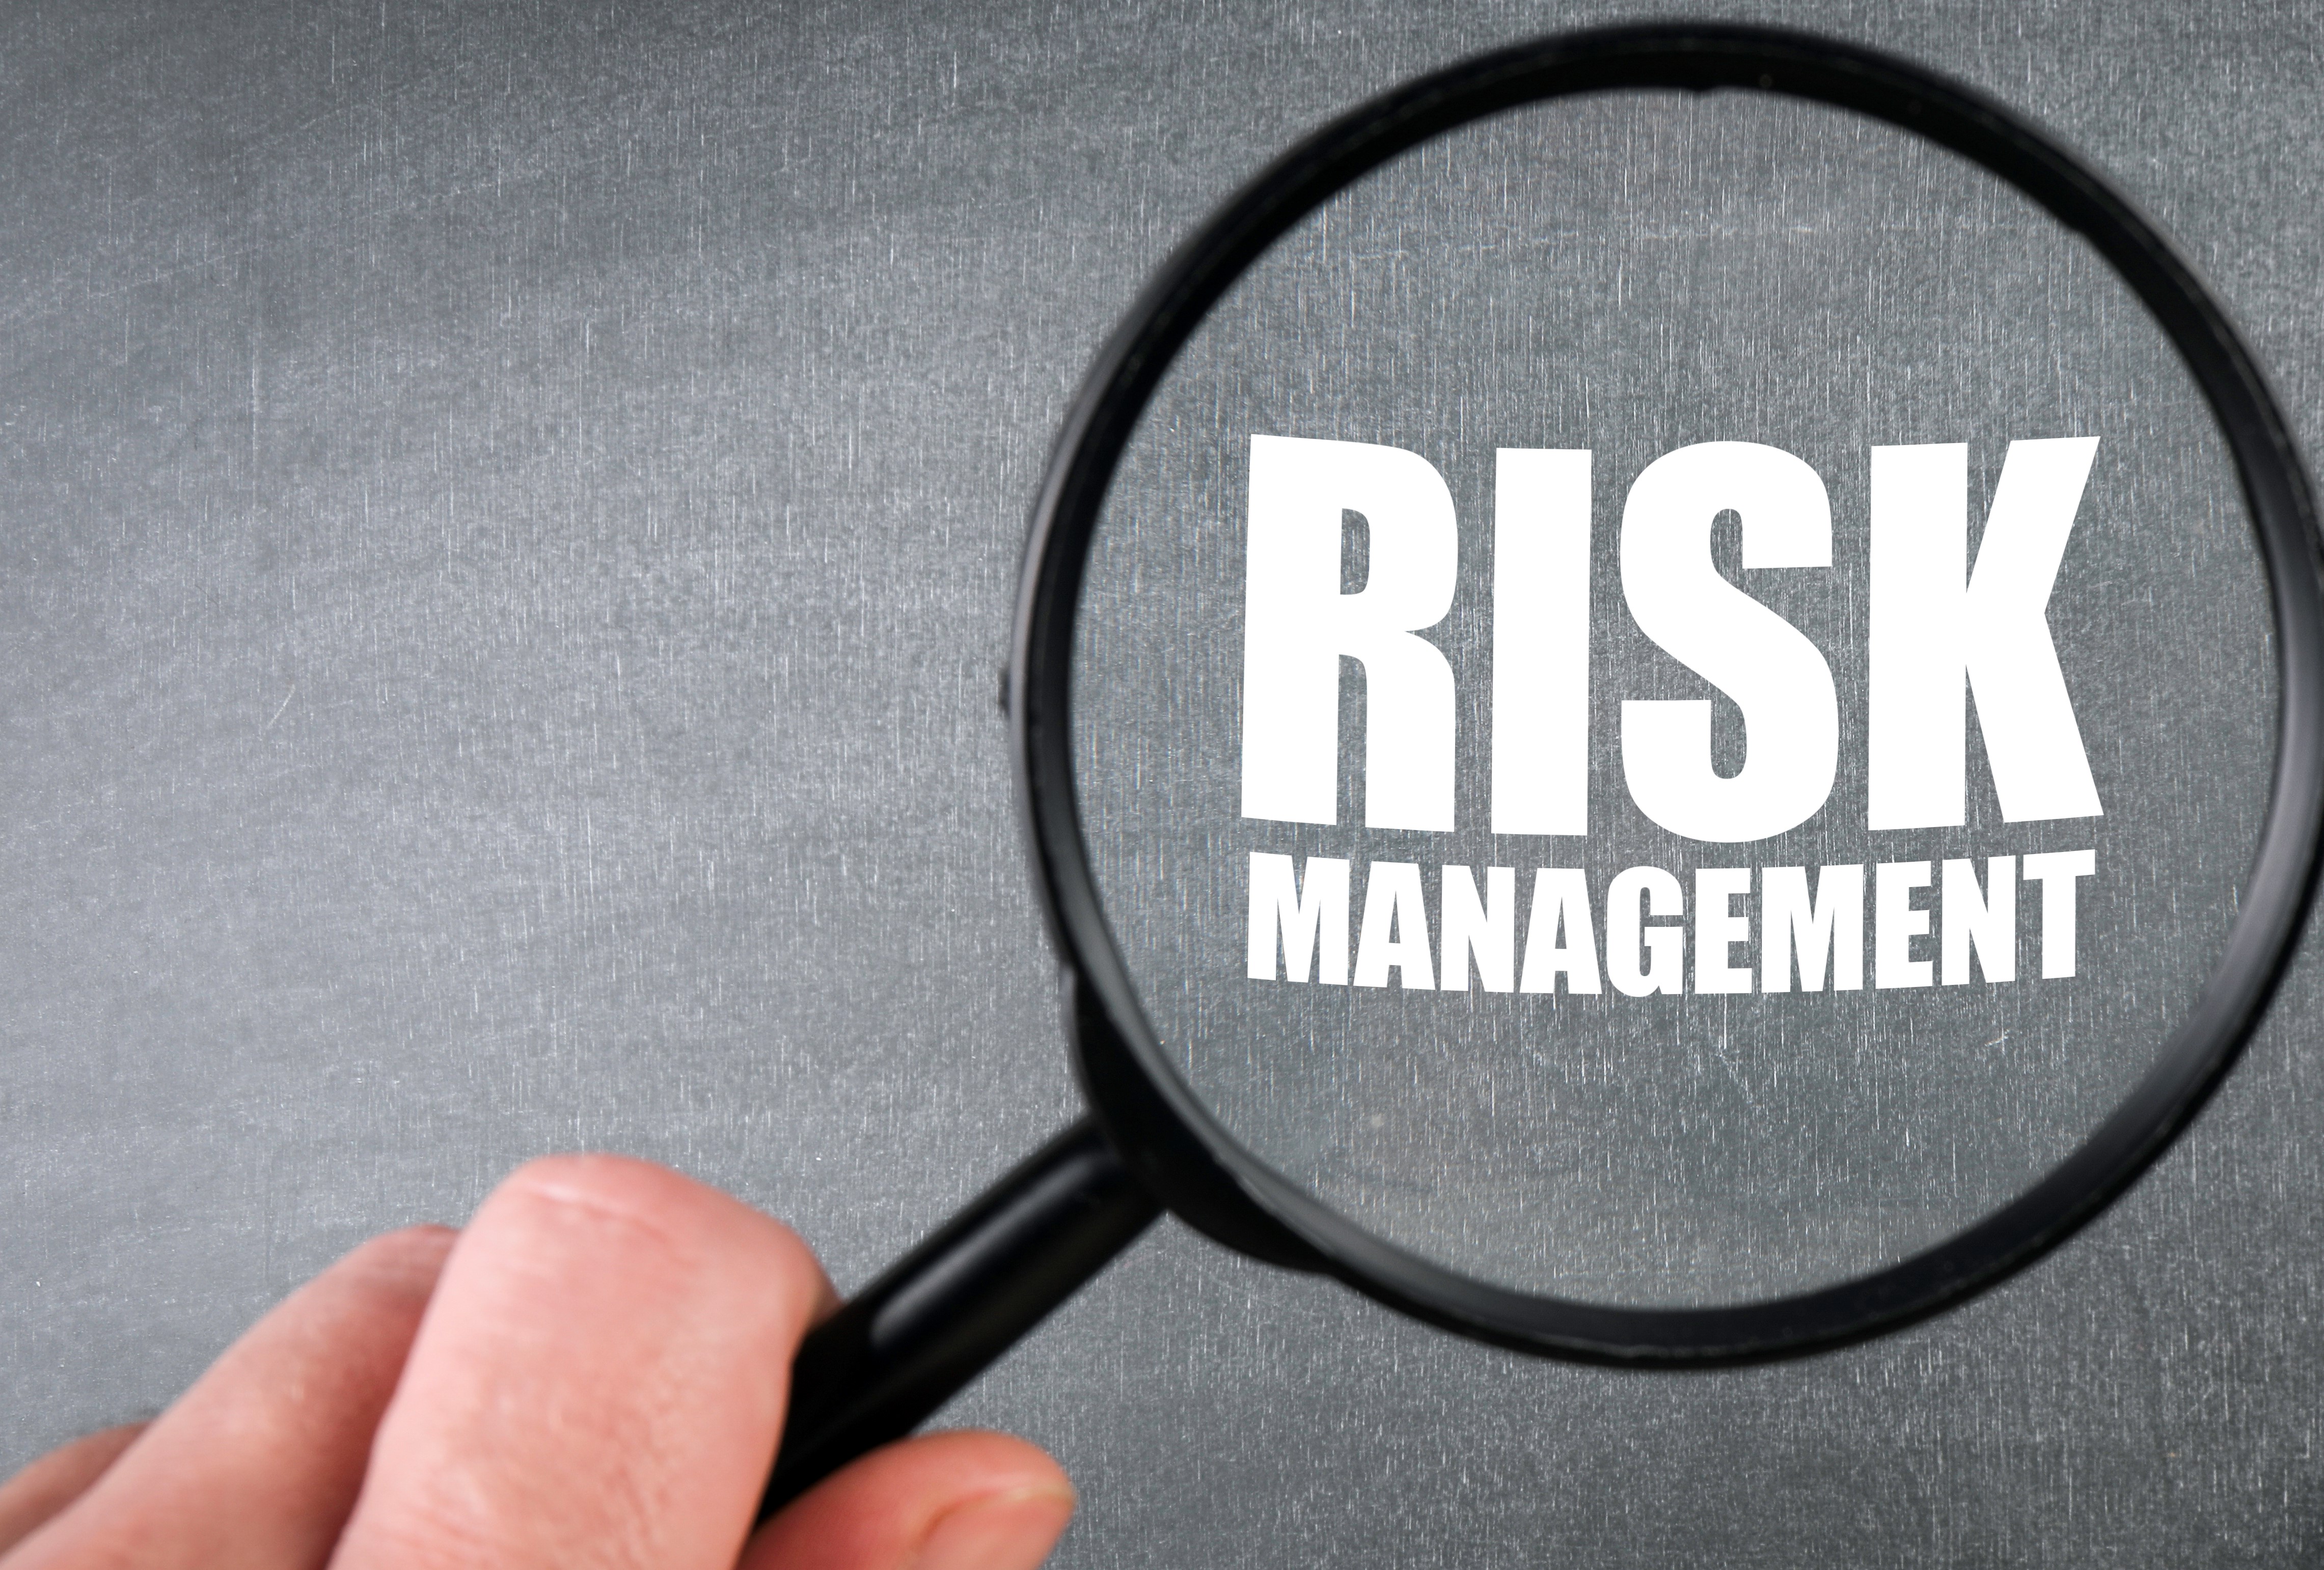 image showing the words "risk management" under a microscope